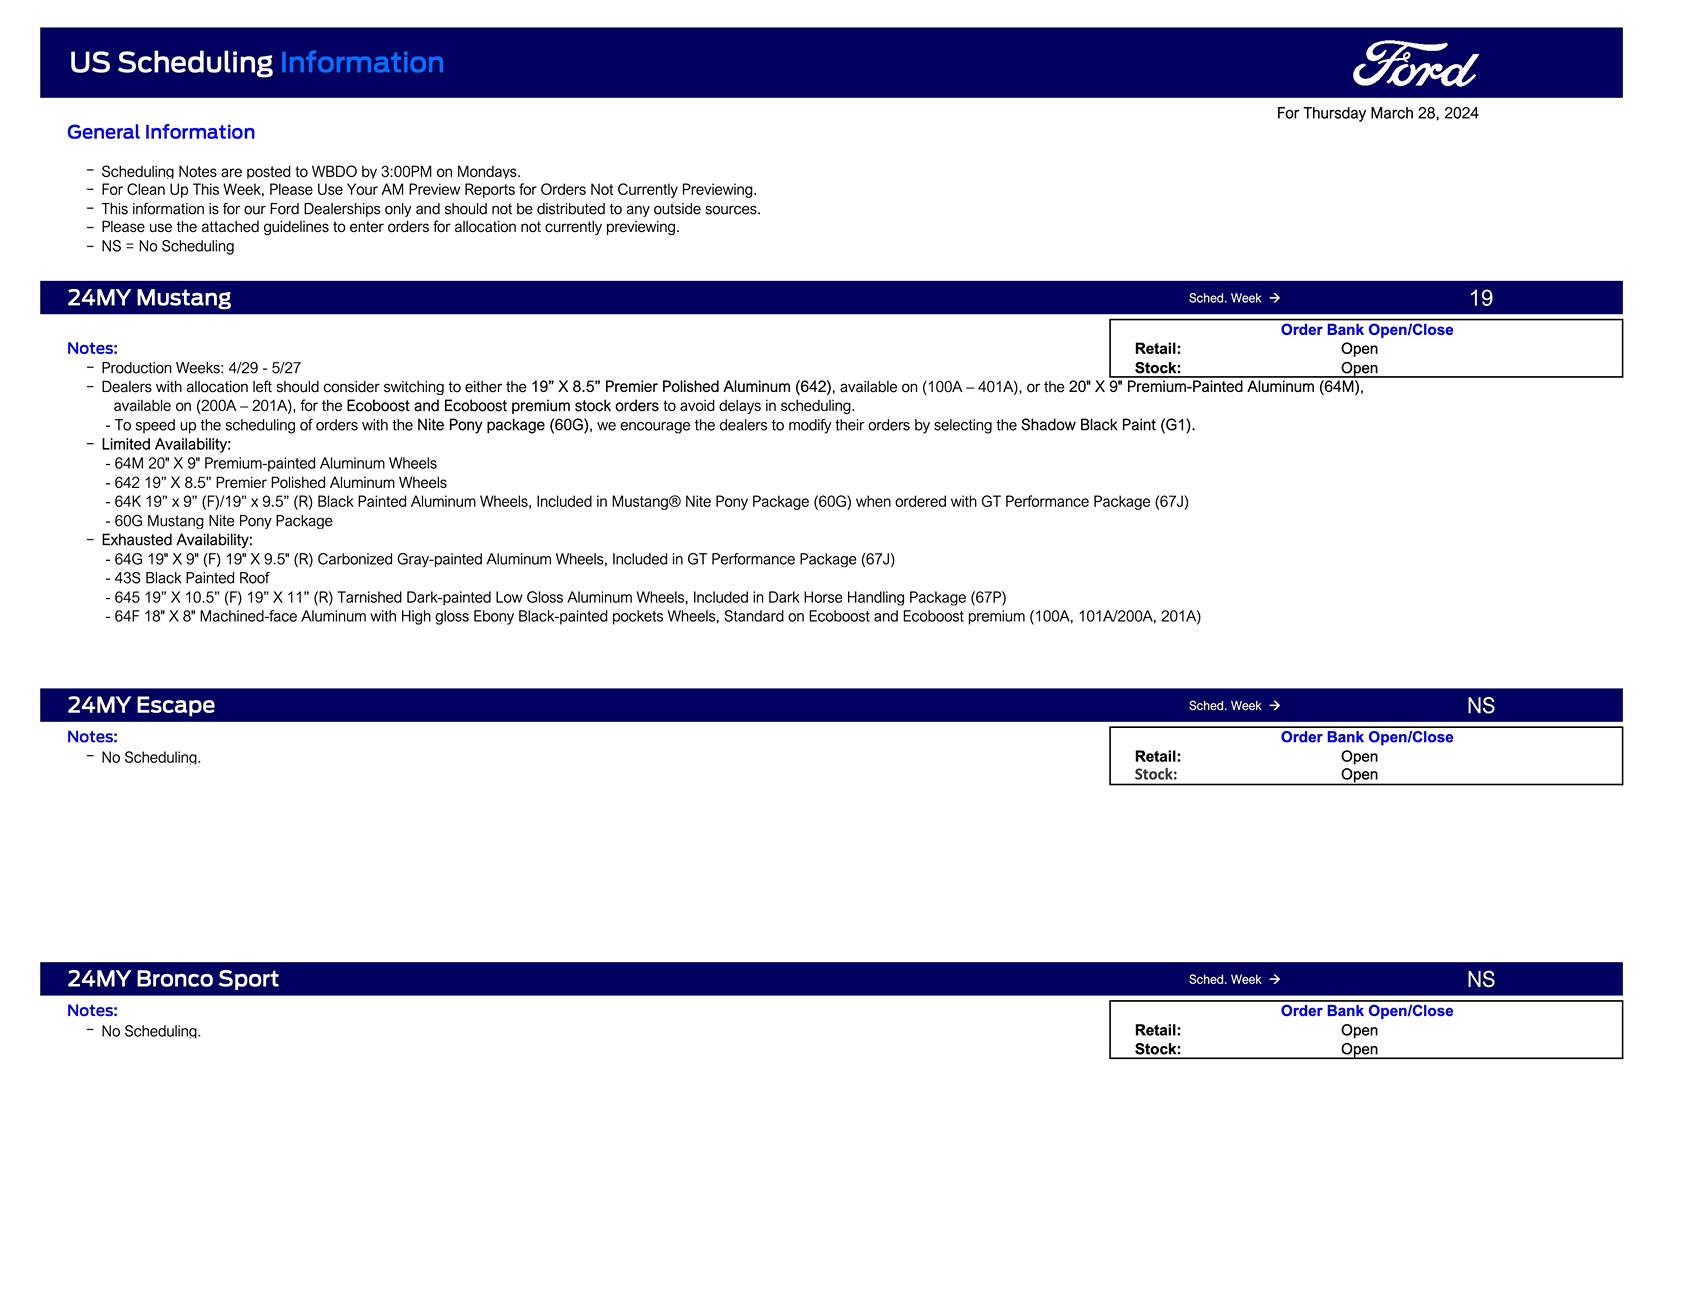 Ford Ranger 2024 Ranger No Scheduling This Week (3/28/24) Ford Scheduling Notes - 3.25.24-1